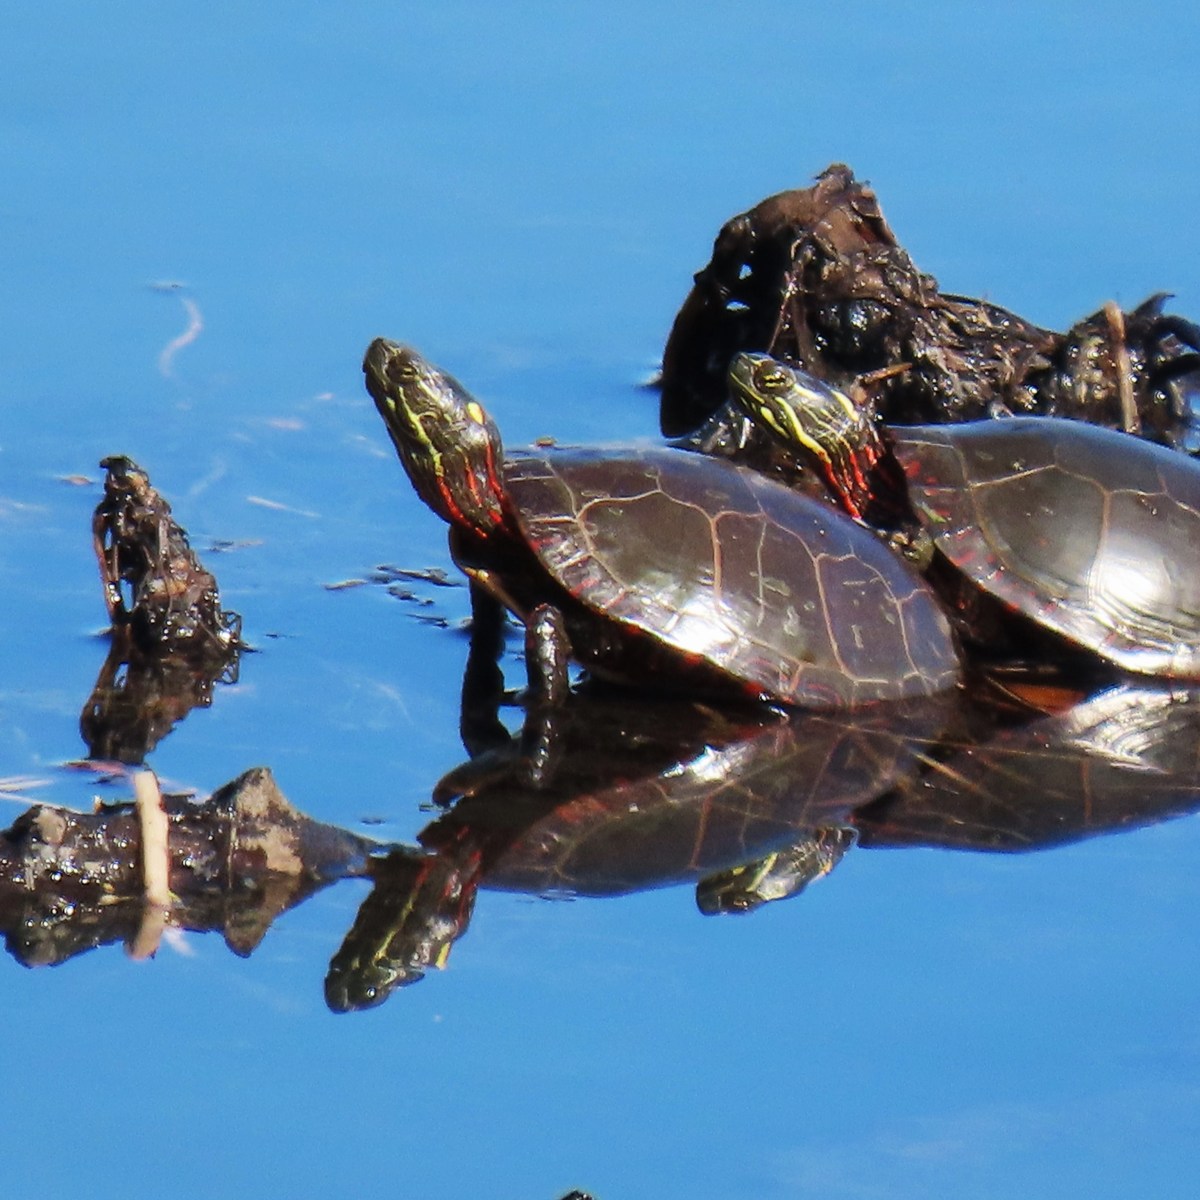 Two painted turtles sit on a partially submerged log